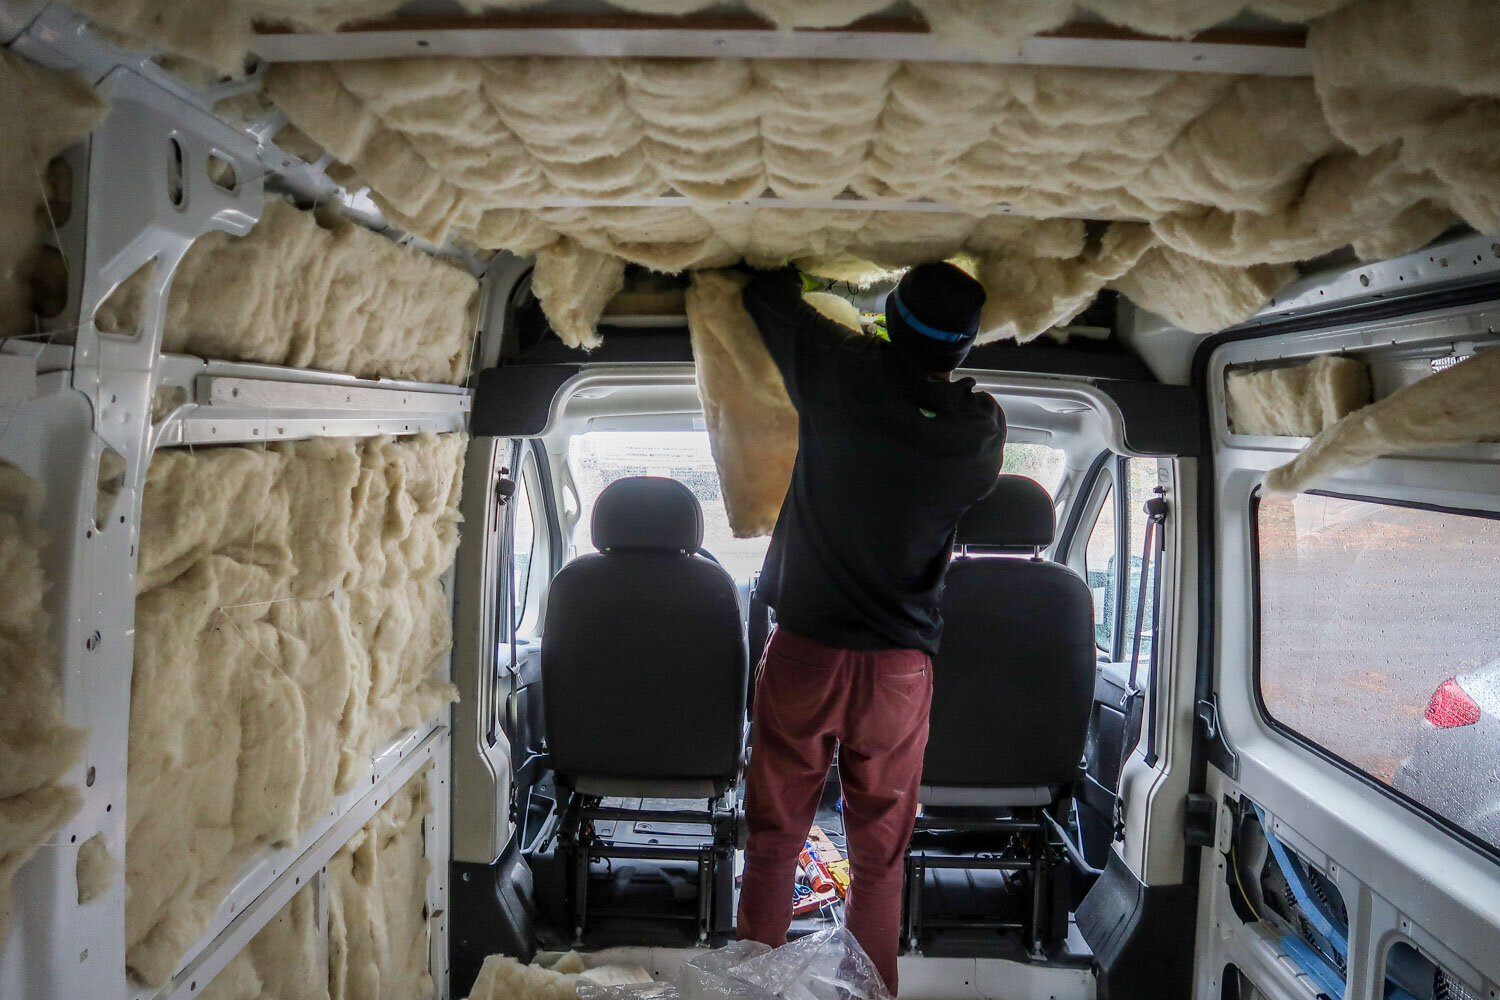 Installing Havelock wool insulation in a Campervan